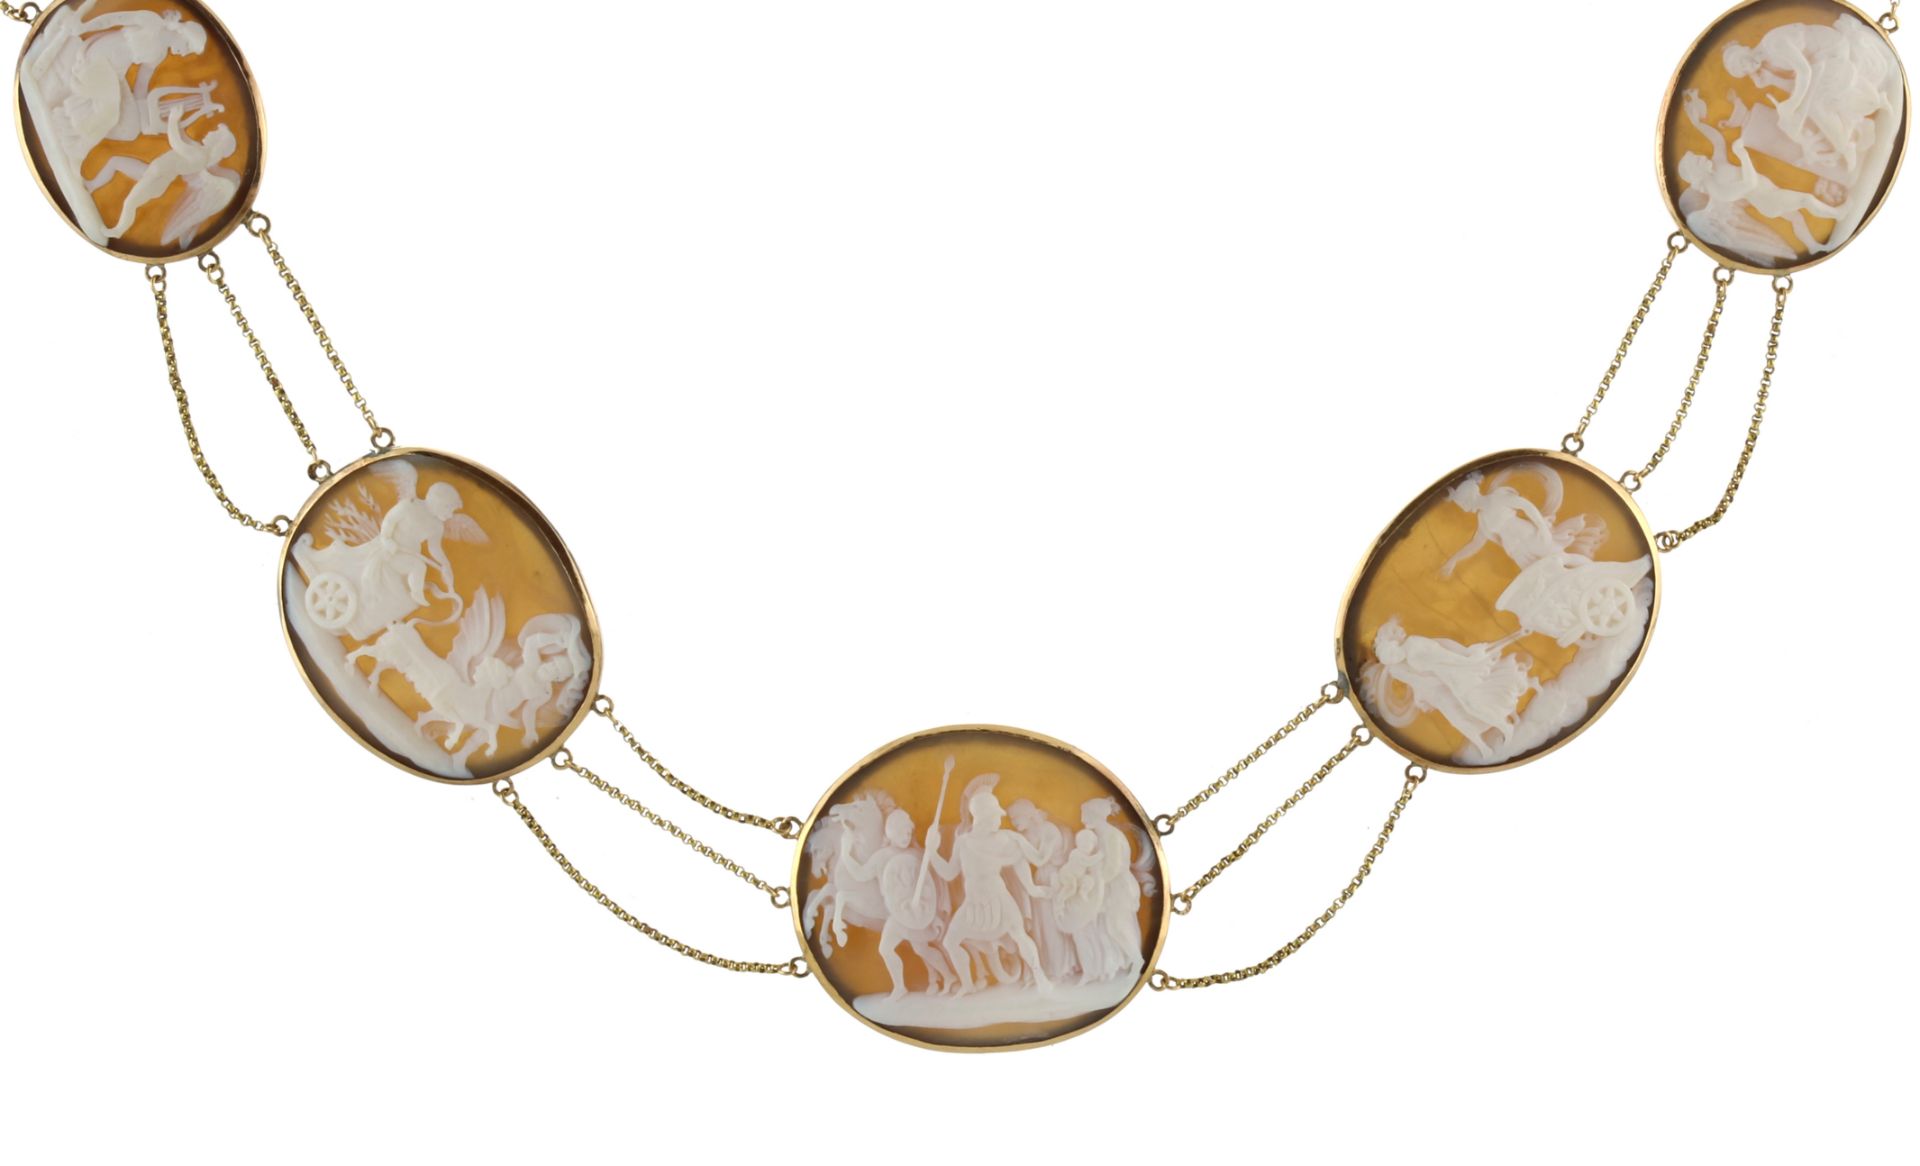 An antique cameo necklace in high carat yellow gold comprising ten graduated oval cameos, each